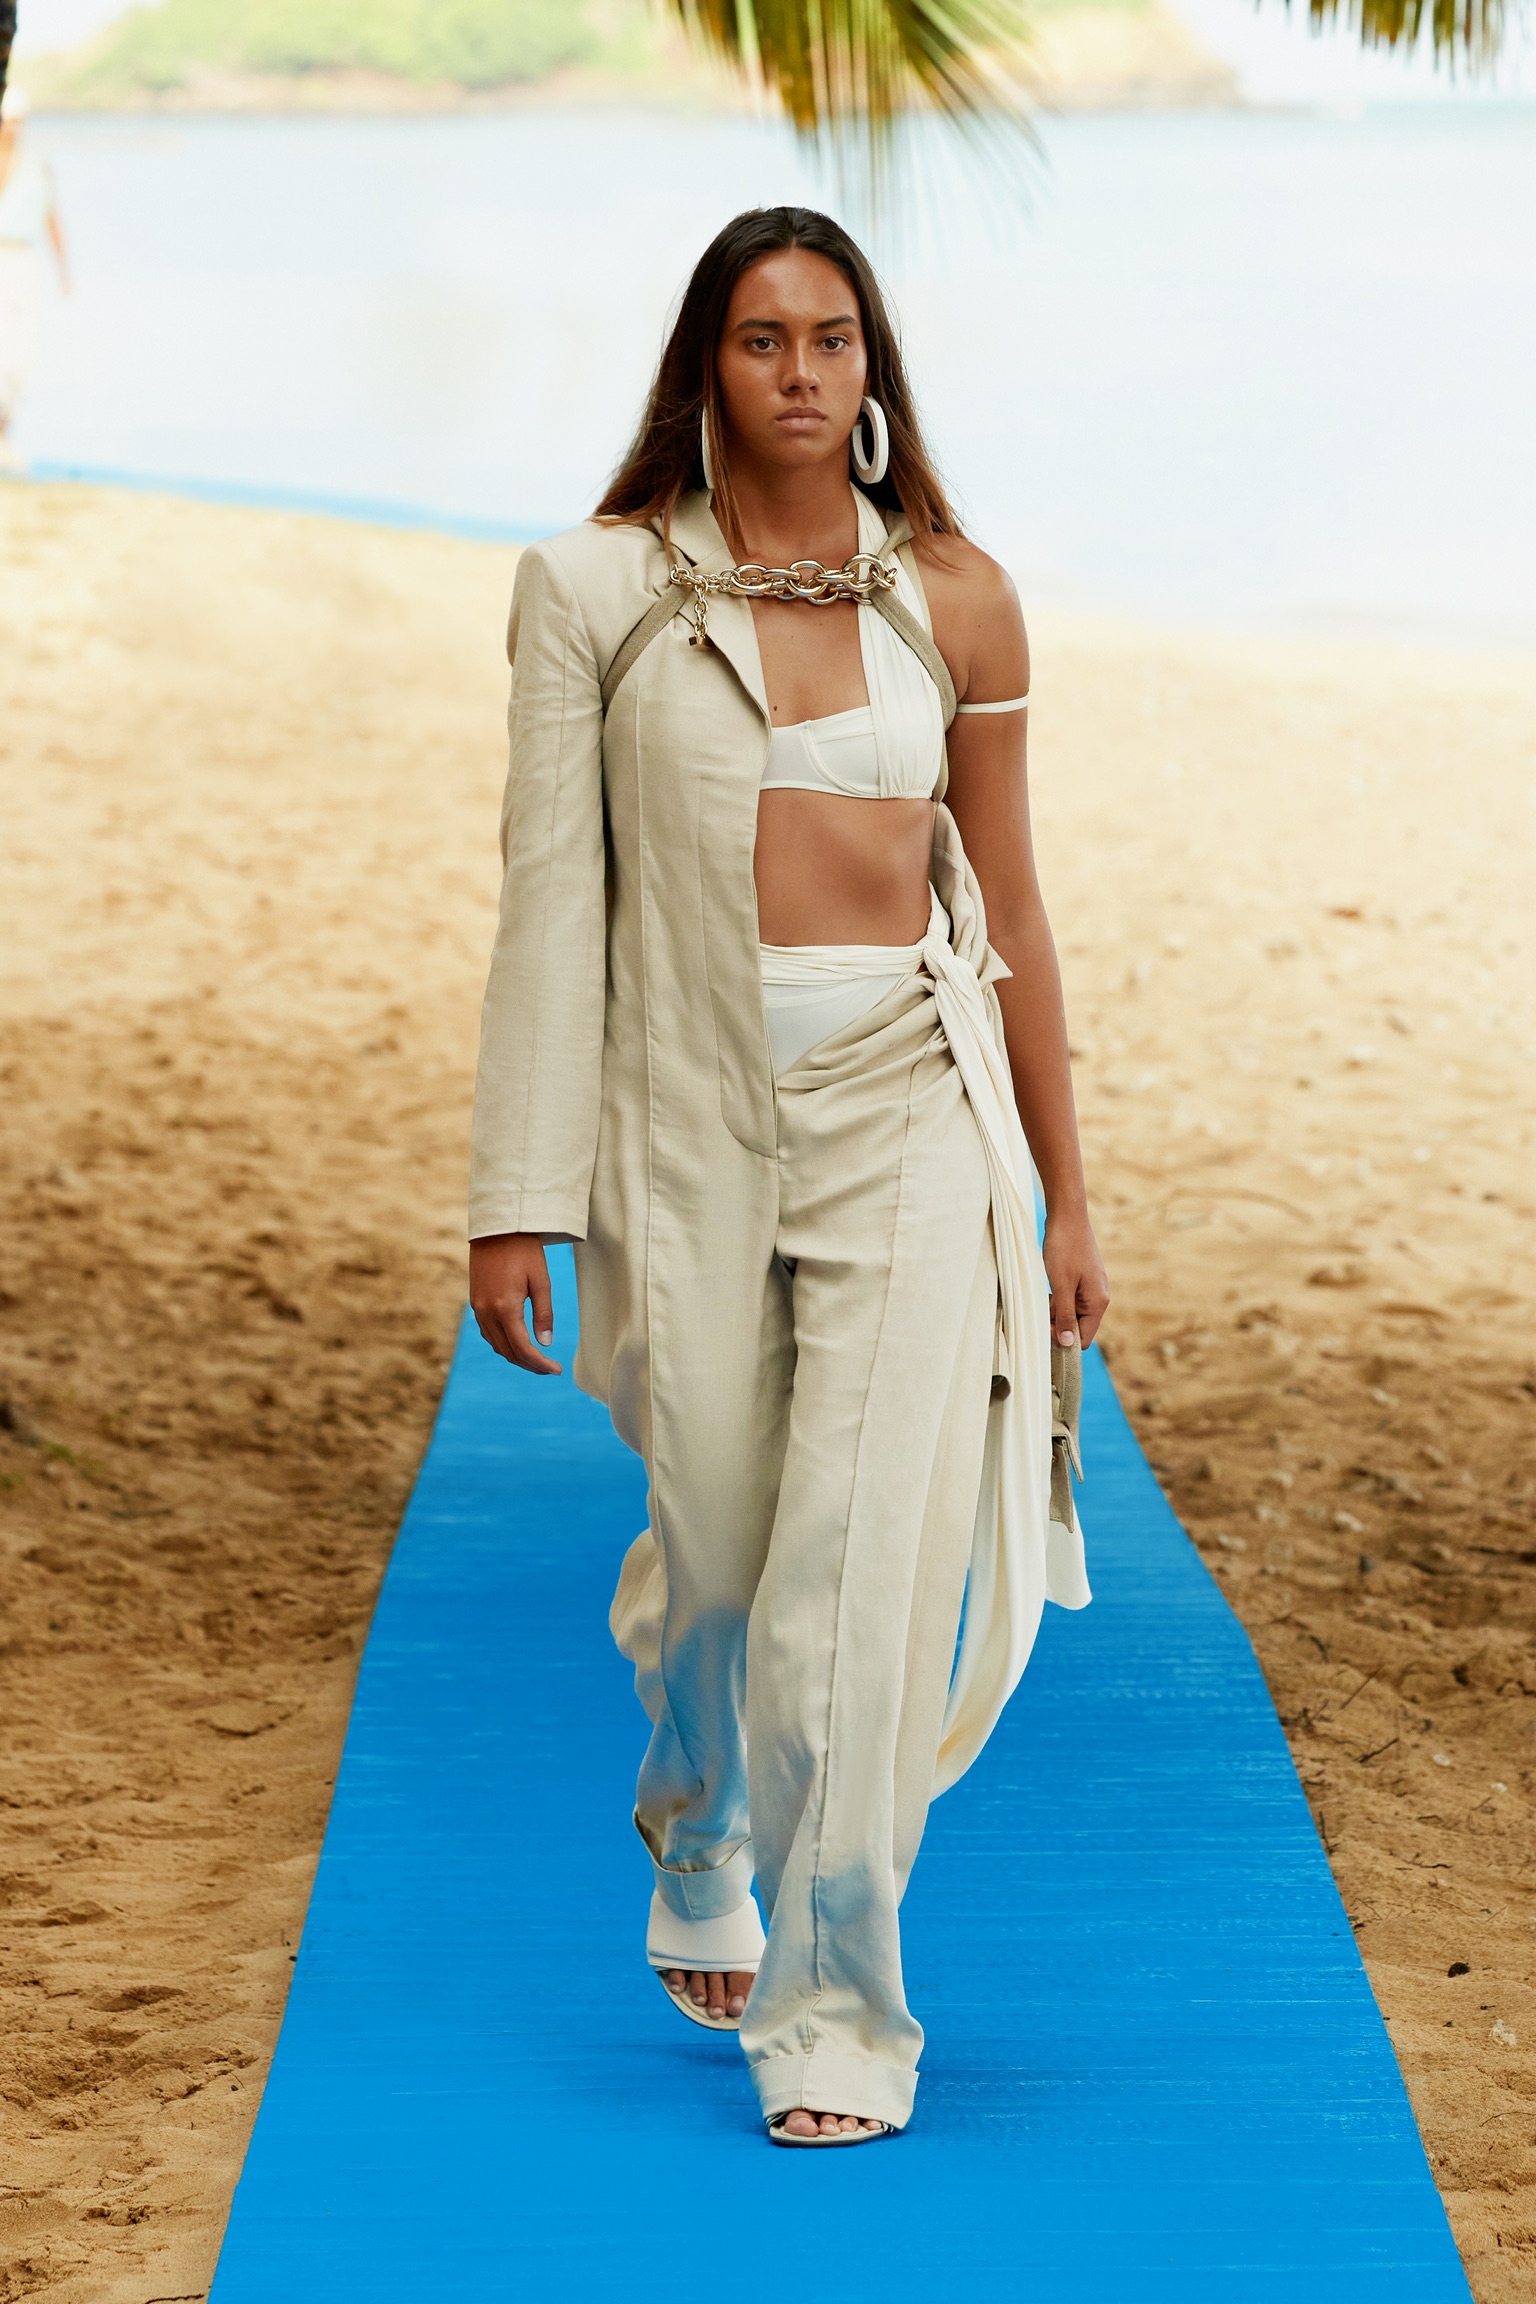 Jacquemus Voyages to Hawaii for Spring/Summer 2022 Collection 'Le 